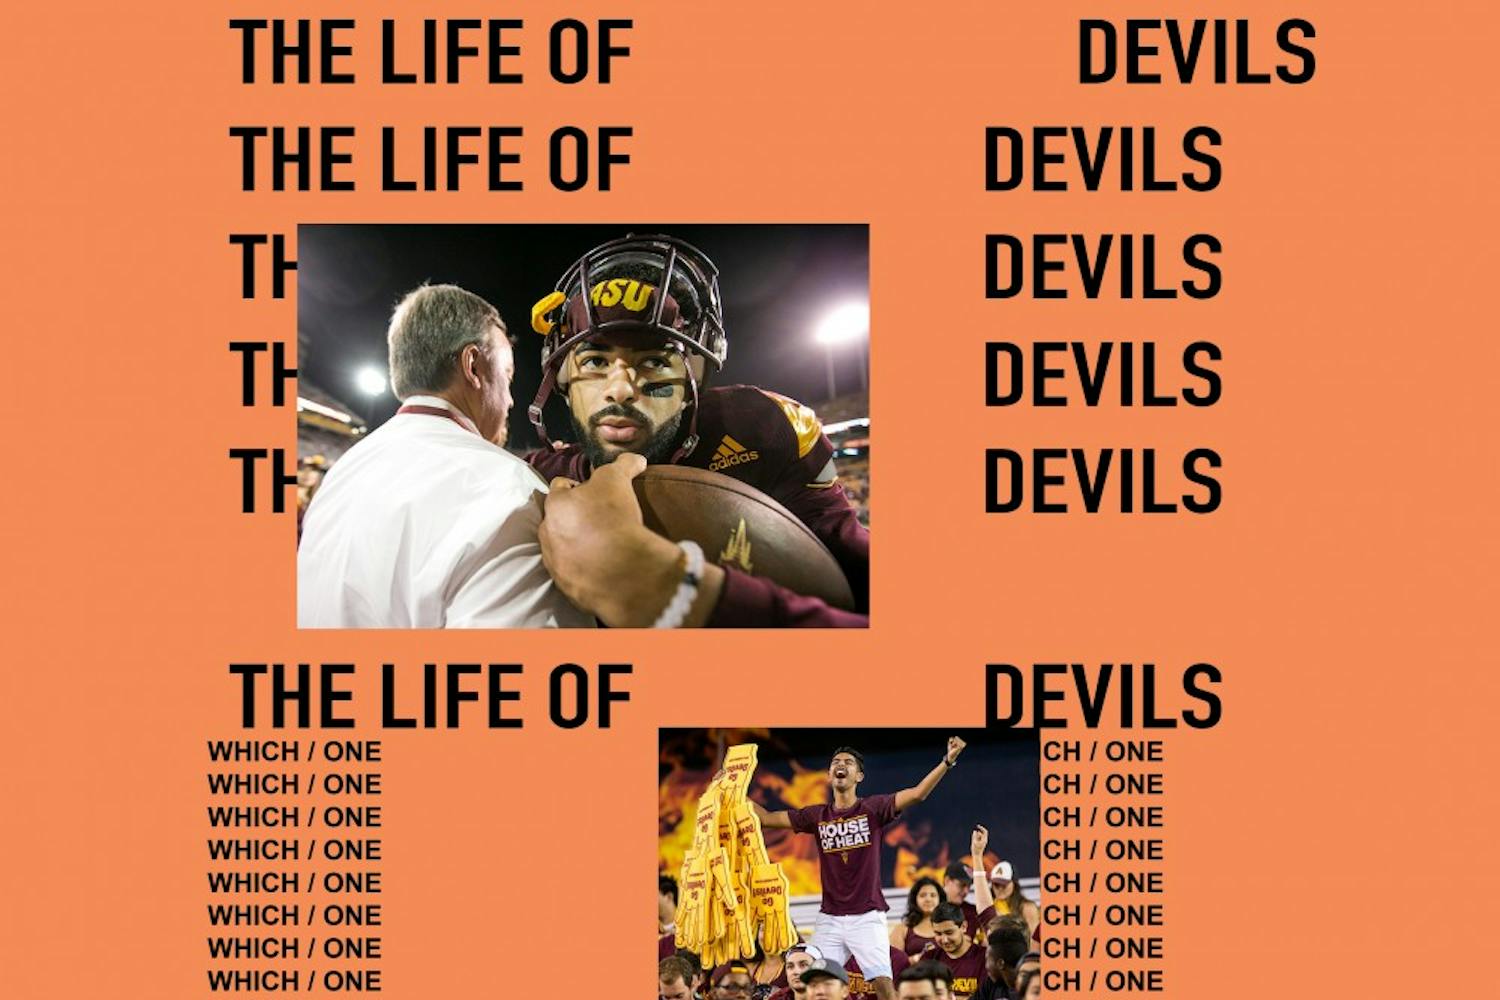 Kanye West's recent album "The Life of Pablo" is reimagined as "The Life of Devils" in this photo illustration.&nbsp;